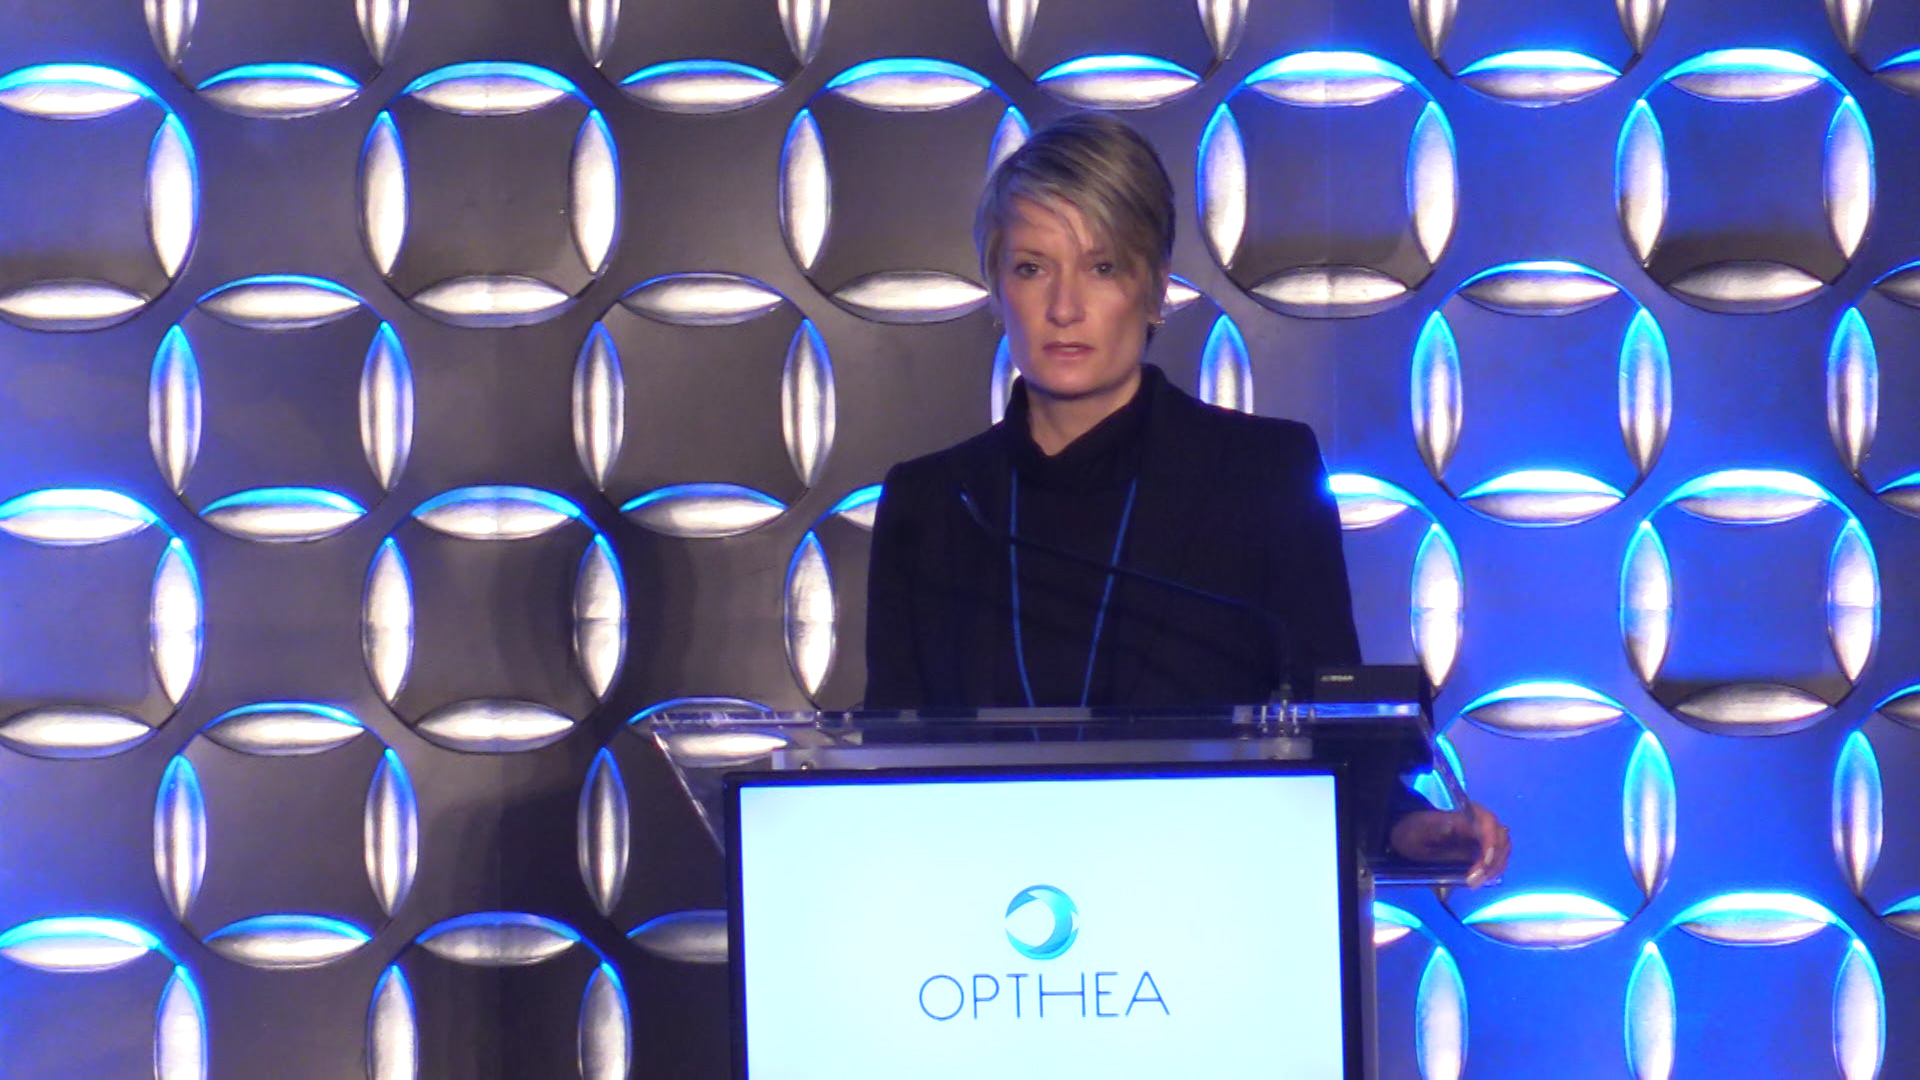 Opthea Limited Updates on Phase I and II OPT-302 Trials